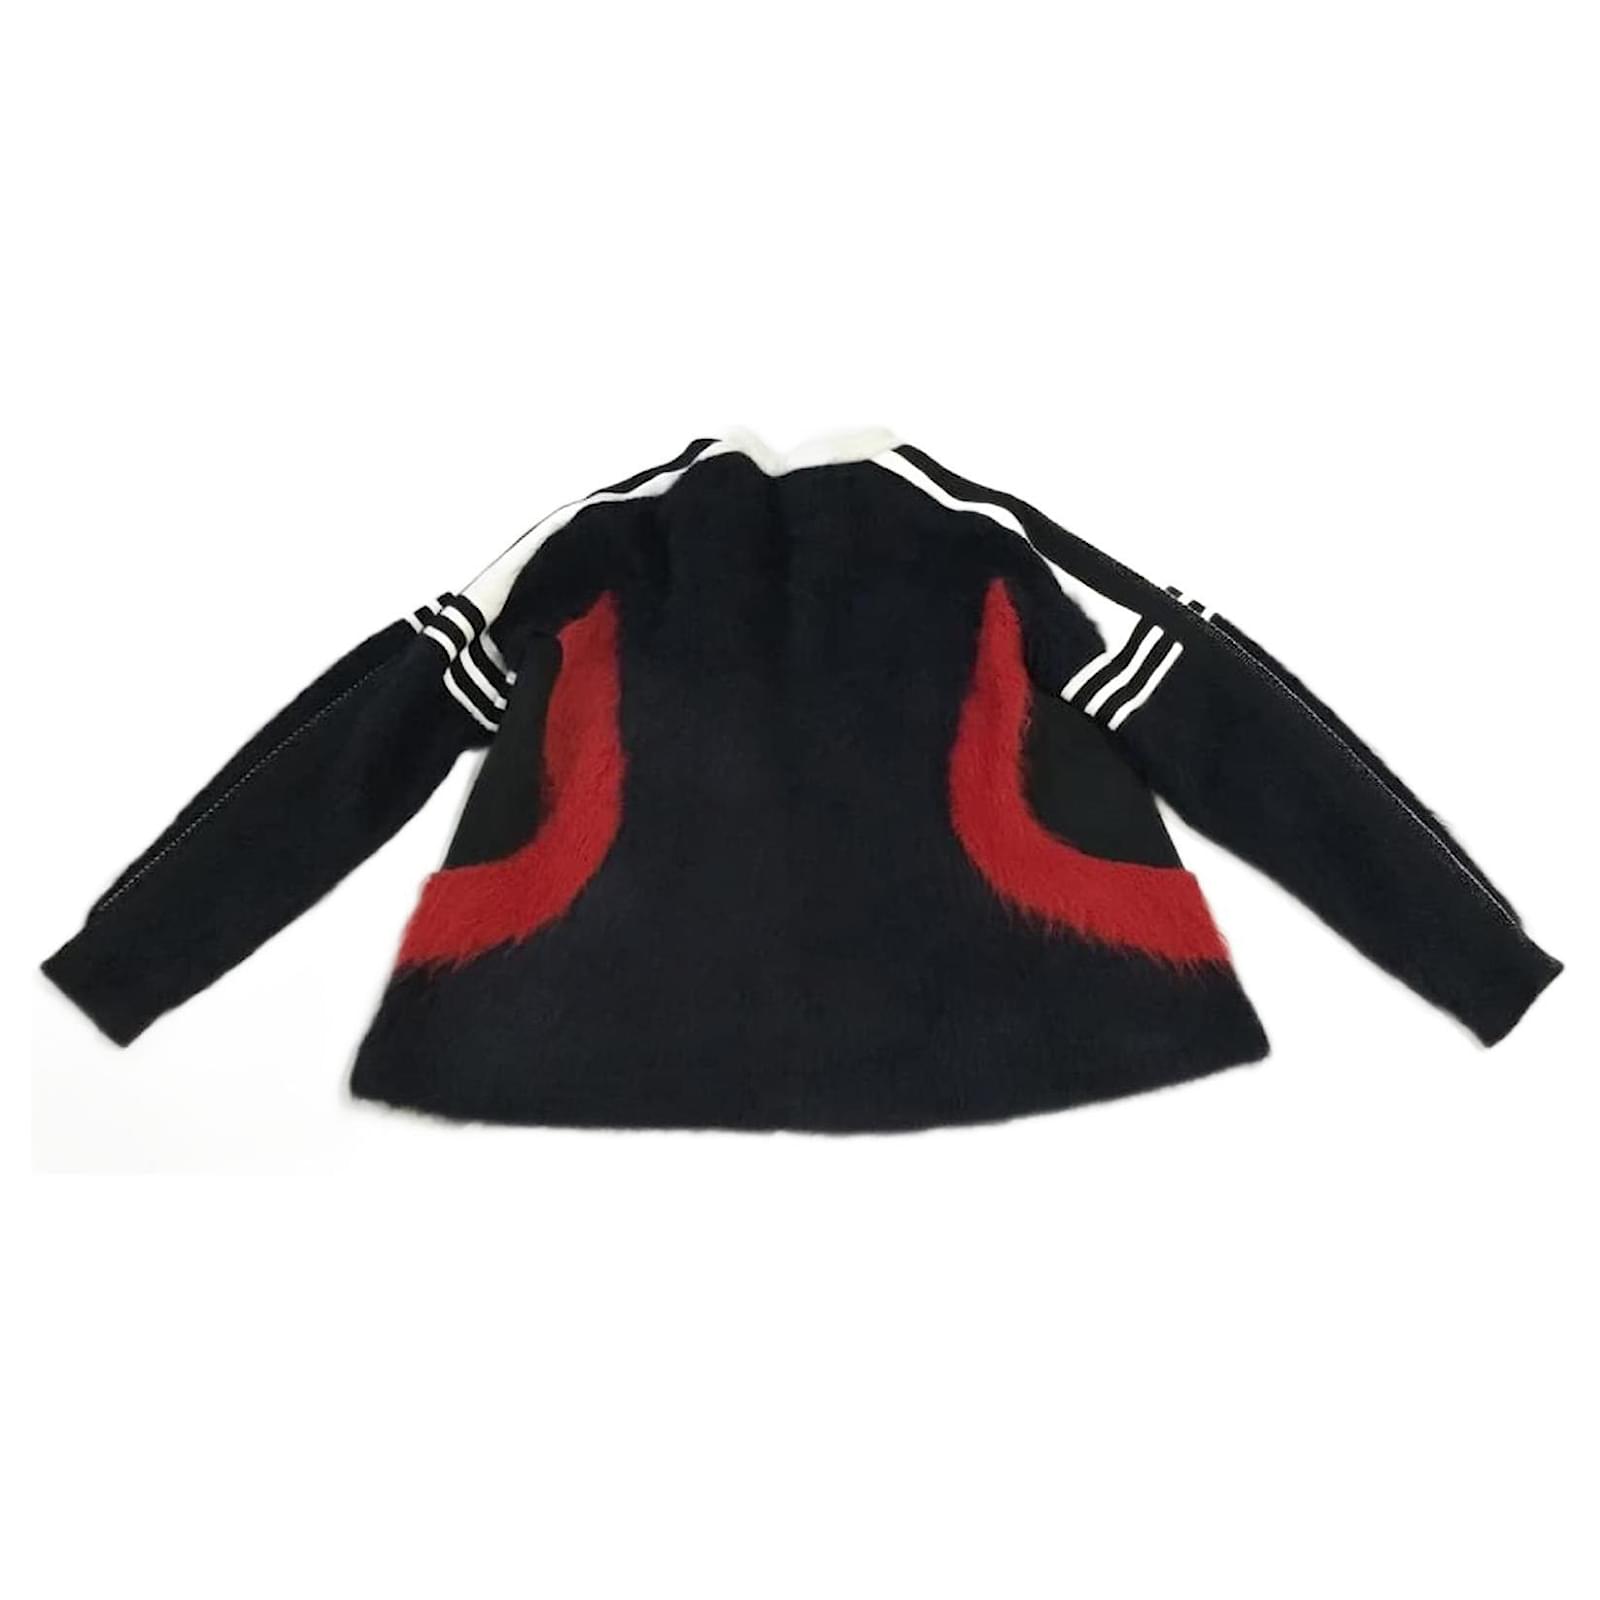 Louis Vuitton Mohair Jacket Black White Red Multiple colors Wool